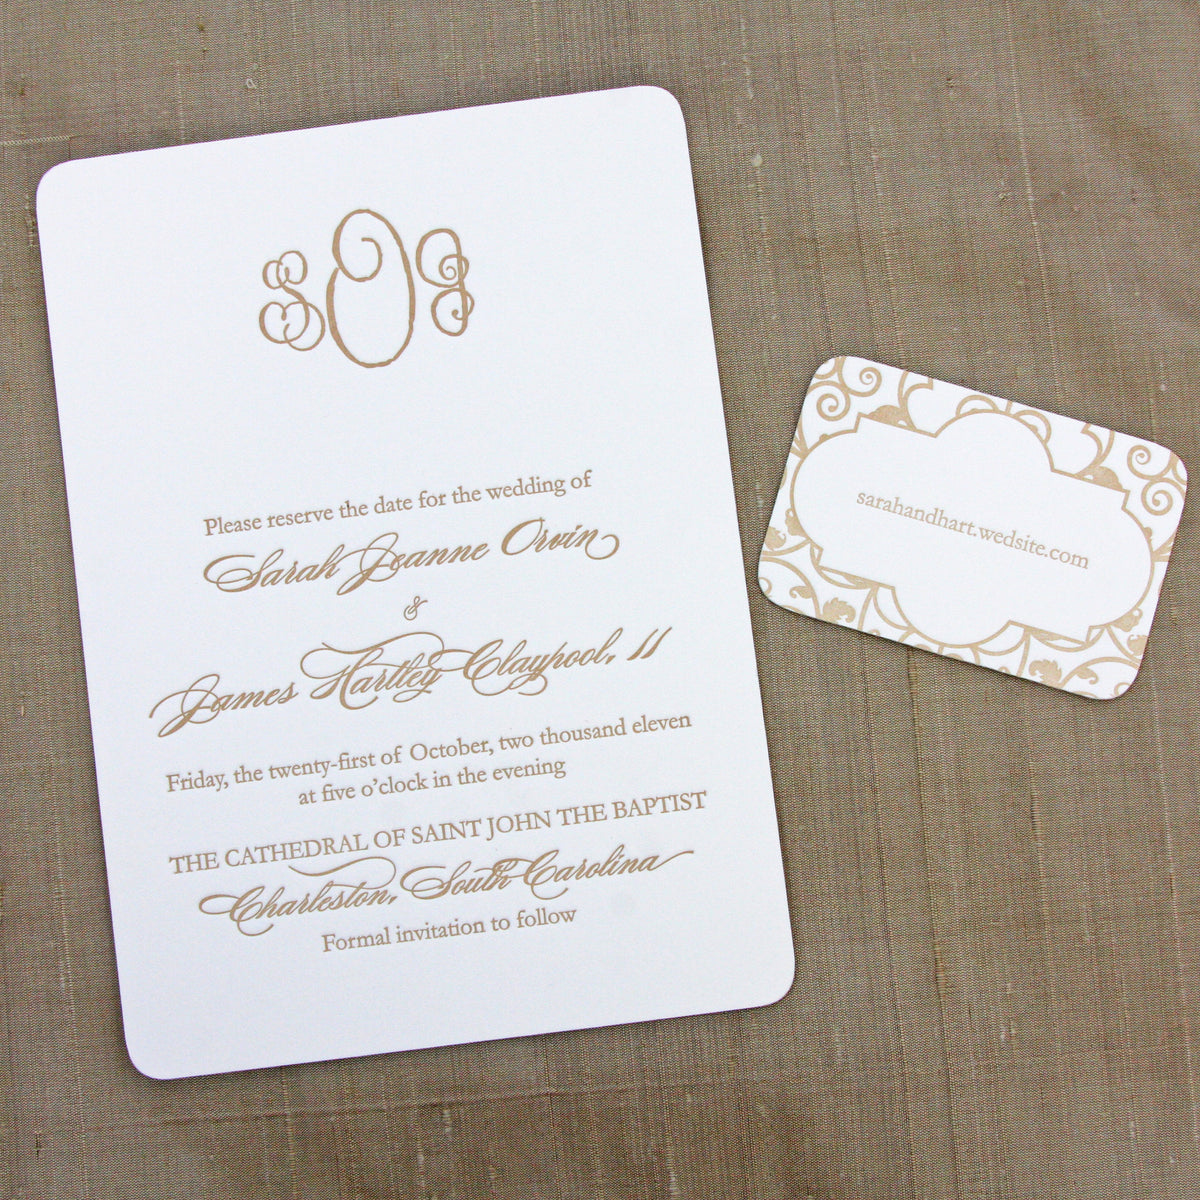 Classic Monogram Letterpress Save the Date with small details card featuring iron gate work of Charleston. 